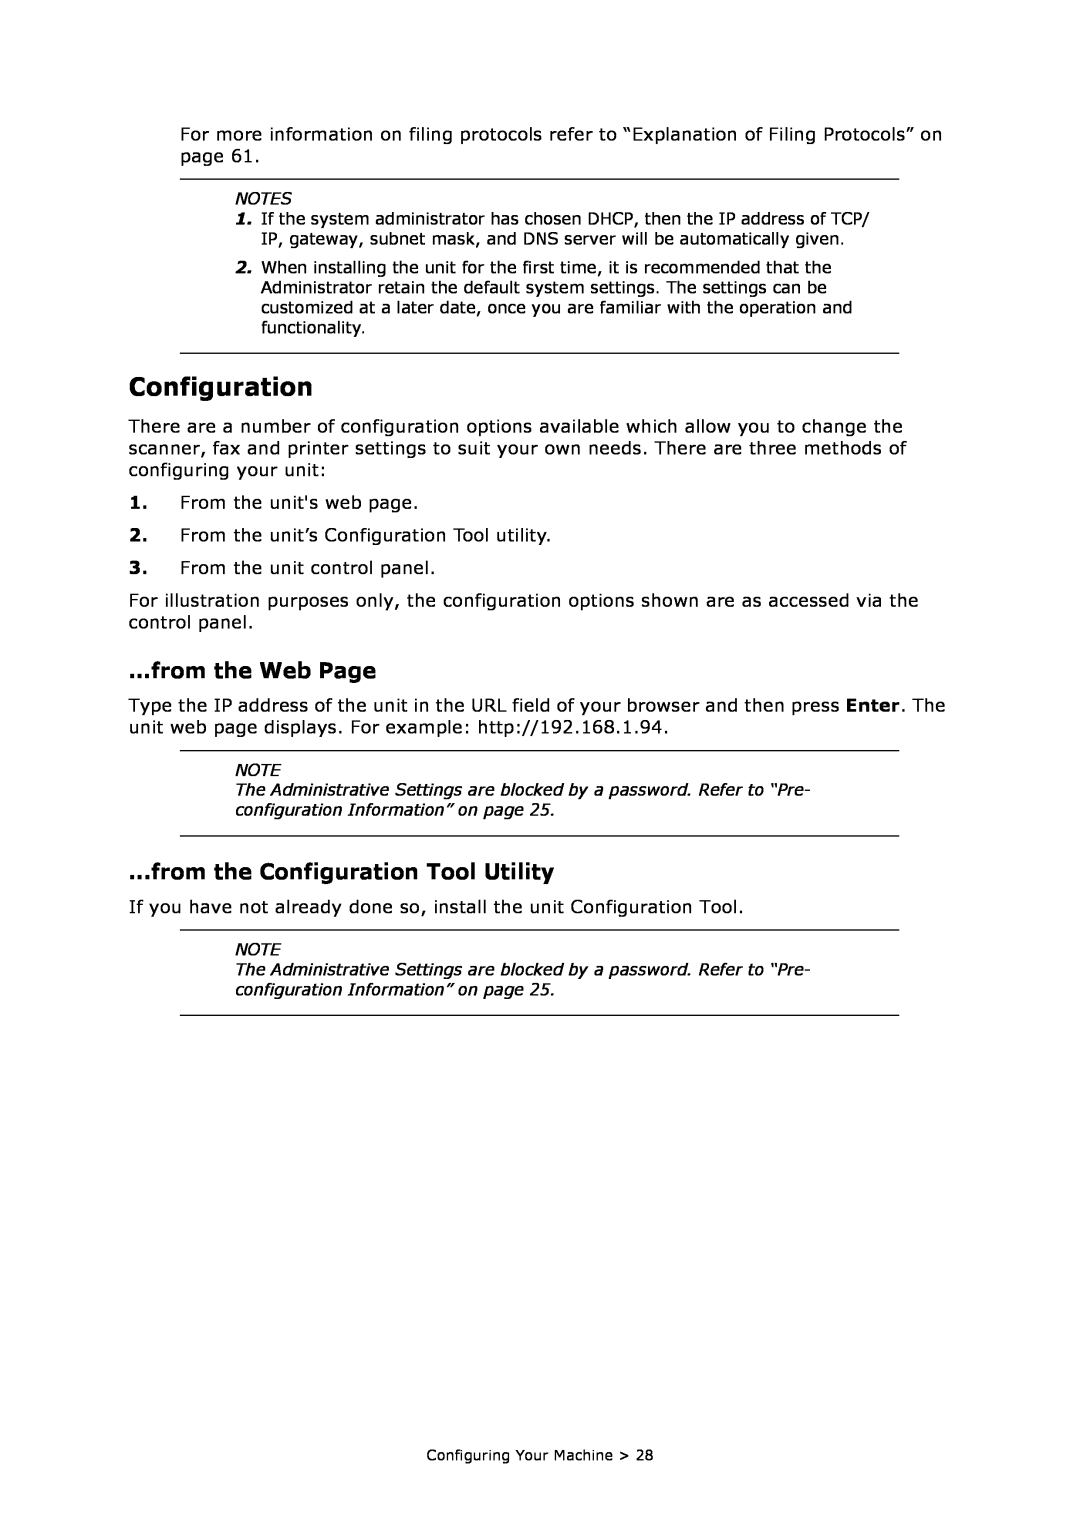 Oki MC860n MFP manual from the Web Page, from the Configuration Tool Utility 